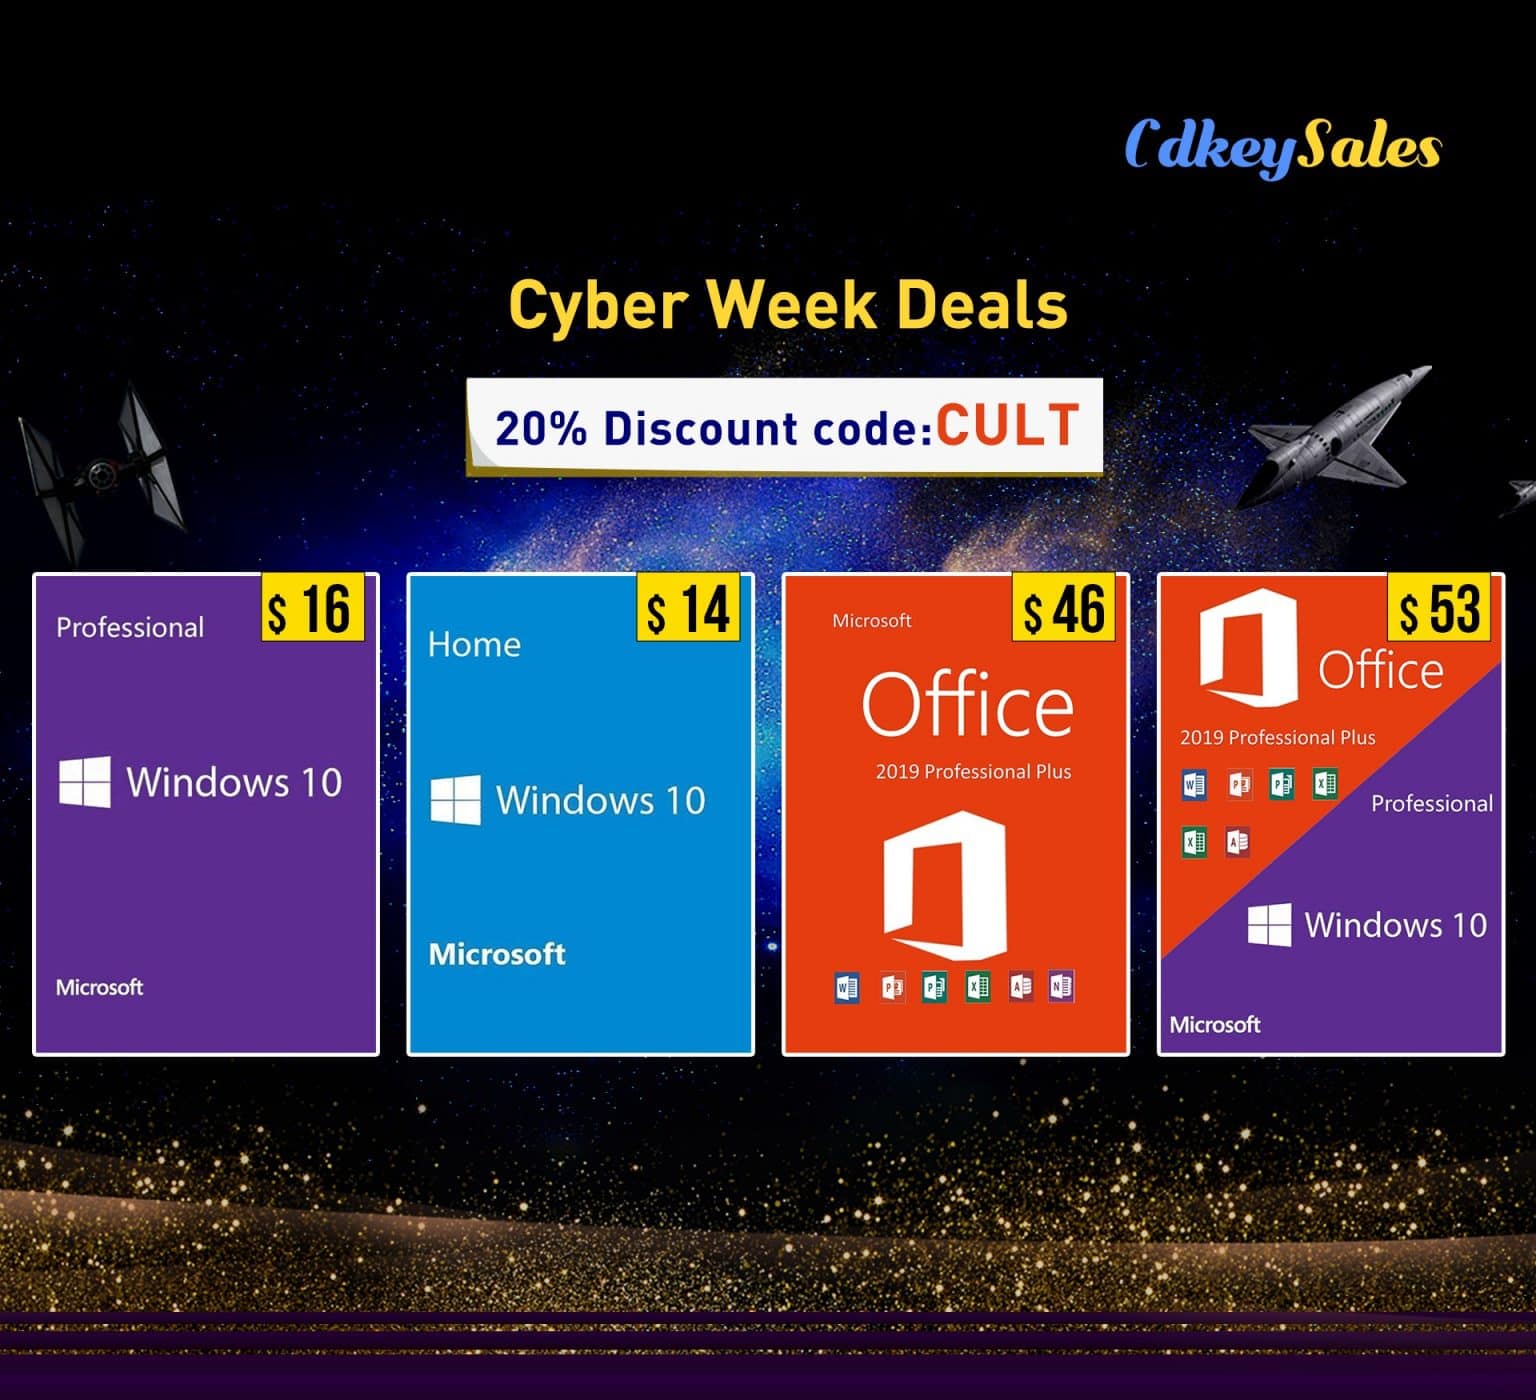 CdkeySales.com offers a 20% discount on Microsoft Windows and Office software activation keys.